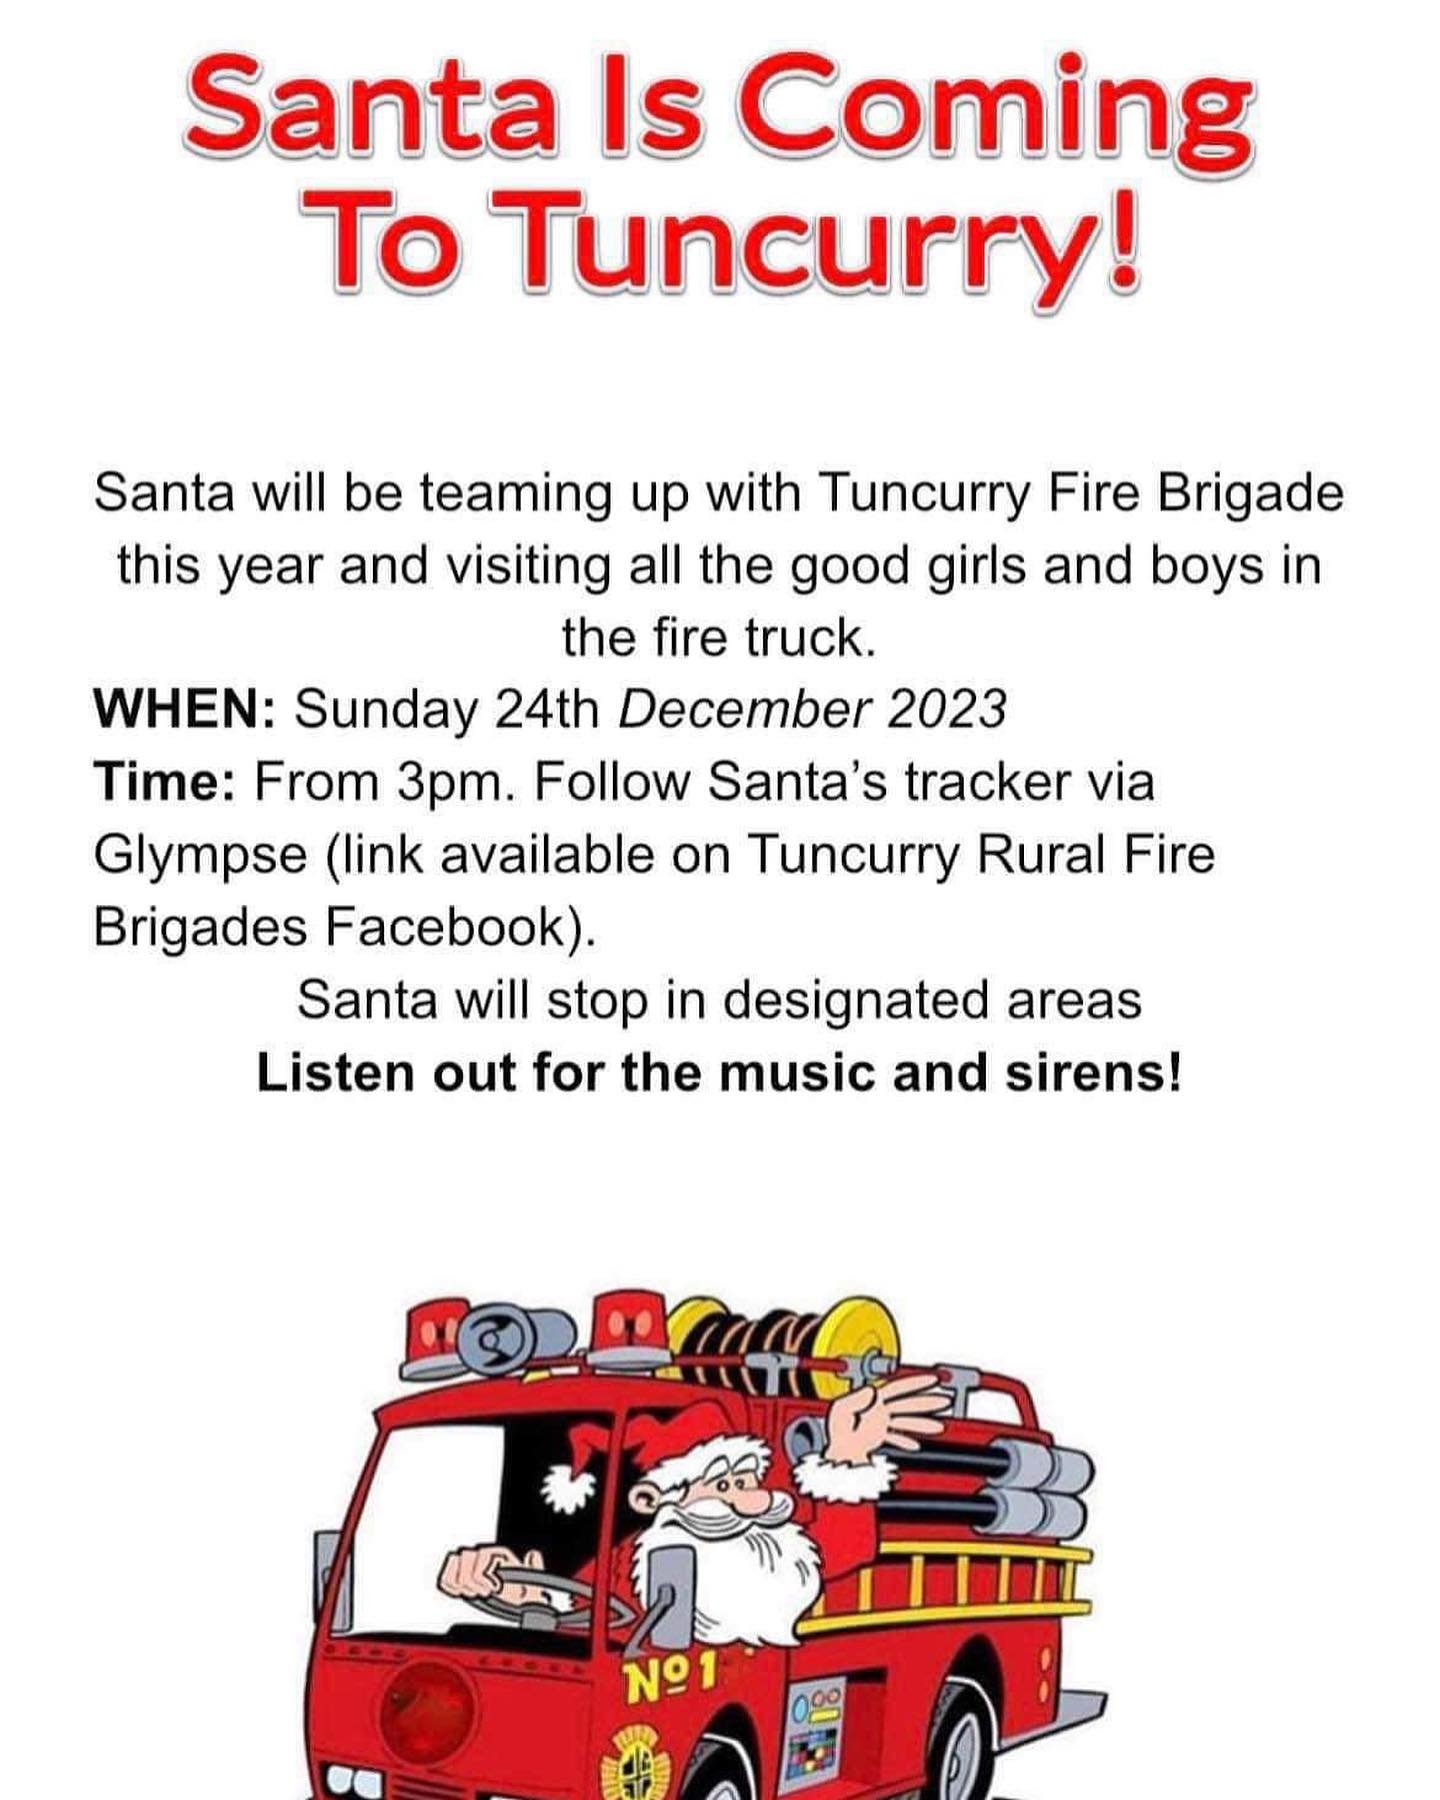 🎅SANTA IS COMING TO TOWN 🎅

Santa will be driving through town in a fire truck this Christmas Eve, giving out lollies to all the children he sees! 🚒

A link will be posted on the Tuncurry Rural Fire Brigade Facebook page closer to the date to trac